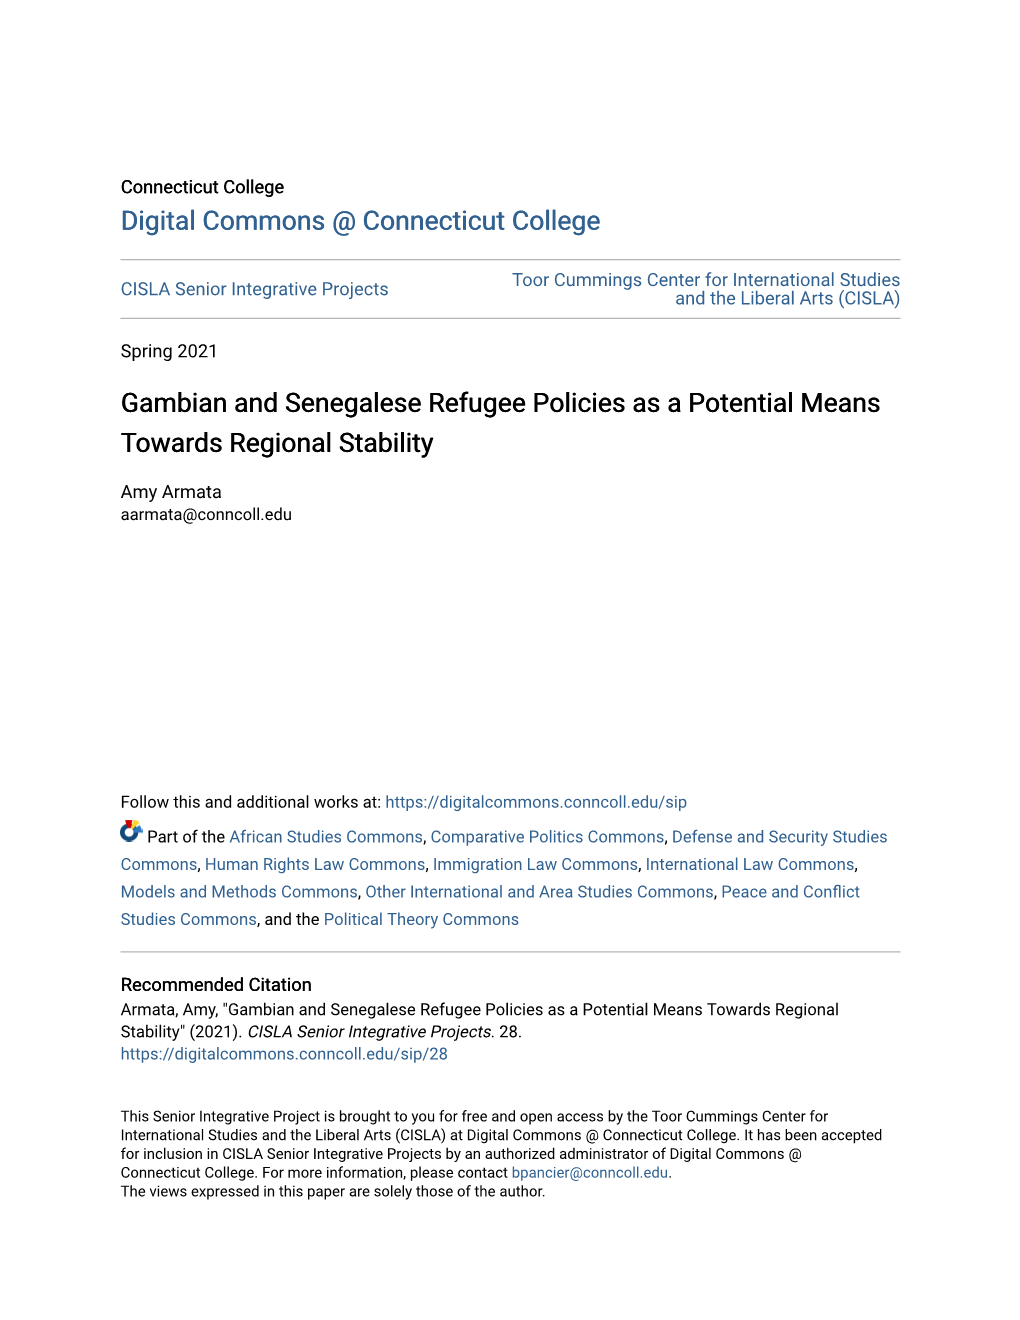 Gambian and Senegalese Refugee Policies As a Potential Means Towards Regional Stability